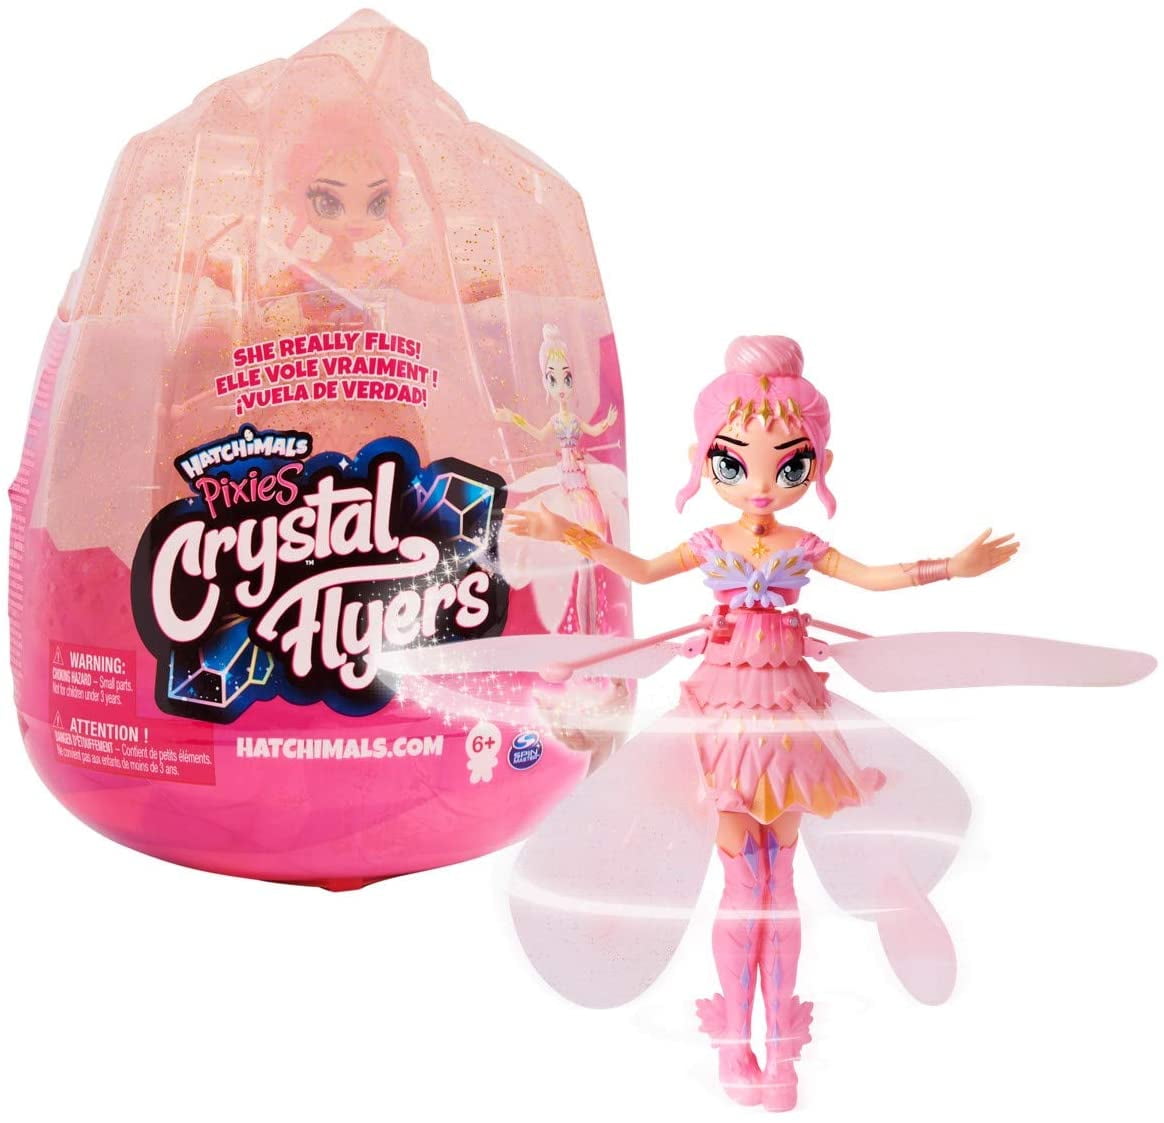 Crystal Flyers Pink Magical Flying Pixie Toy Girls Gifts for Ages 6 and up Hatchimals Pixies Girl Toys